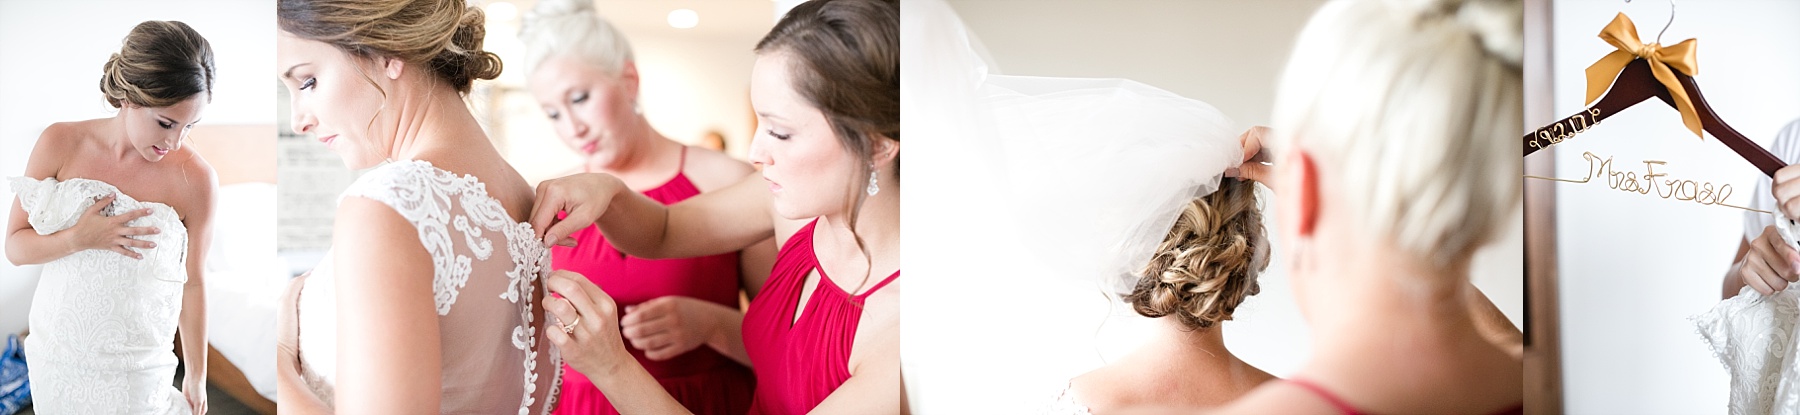 Get the most out of your getting ready photos with these three tips!